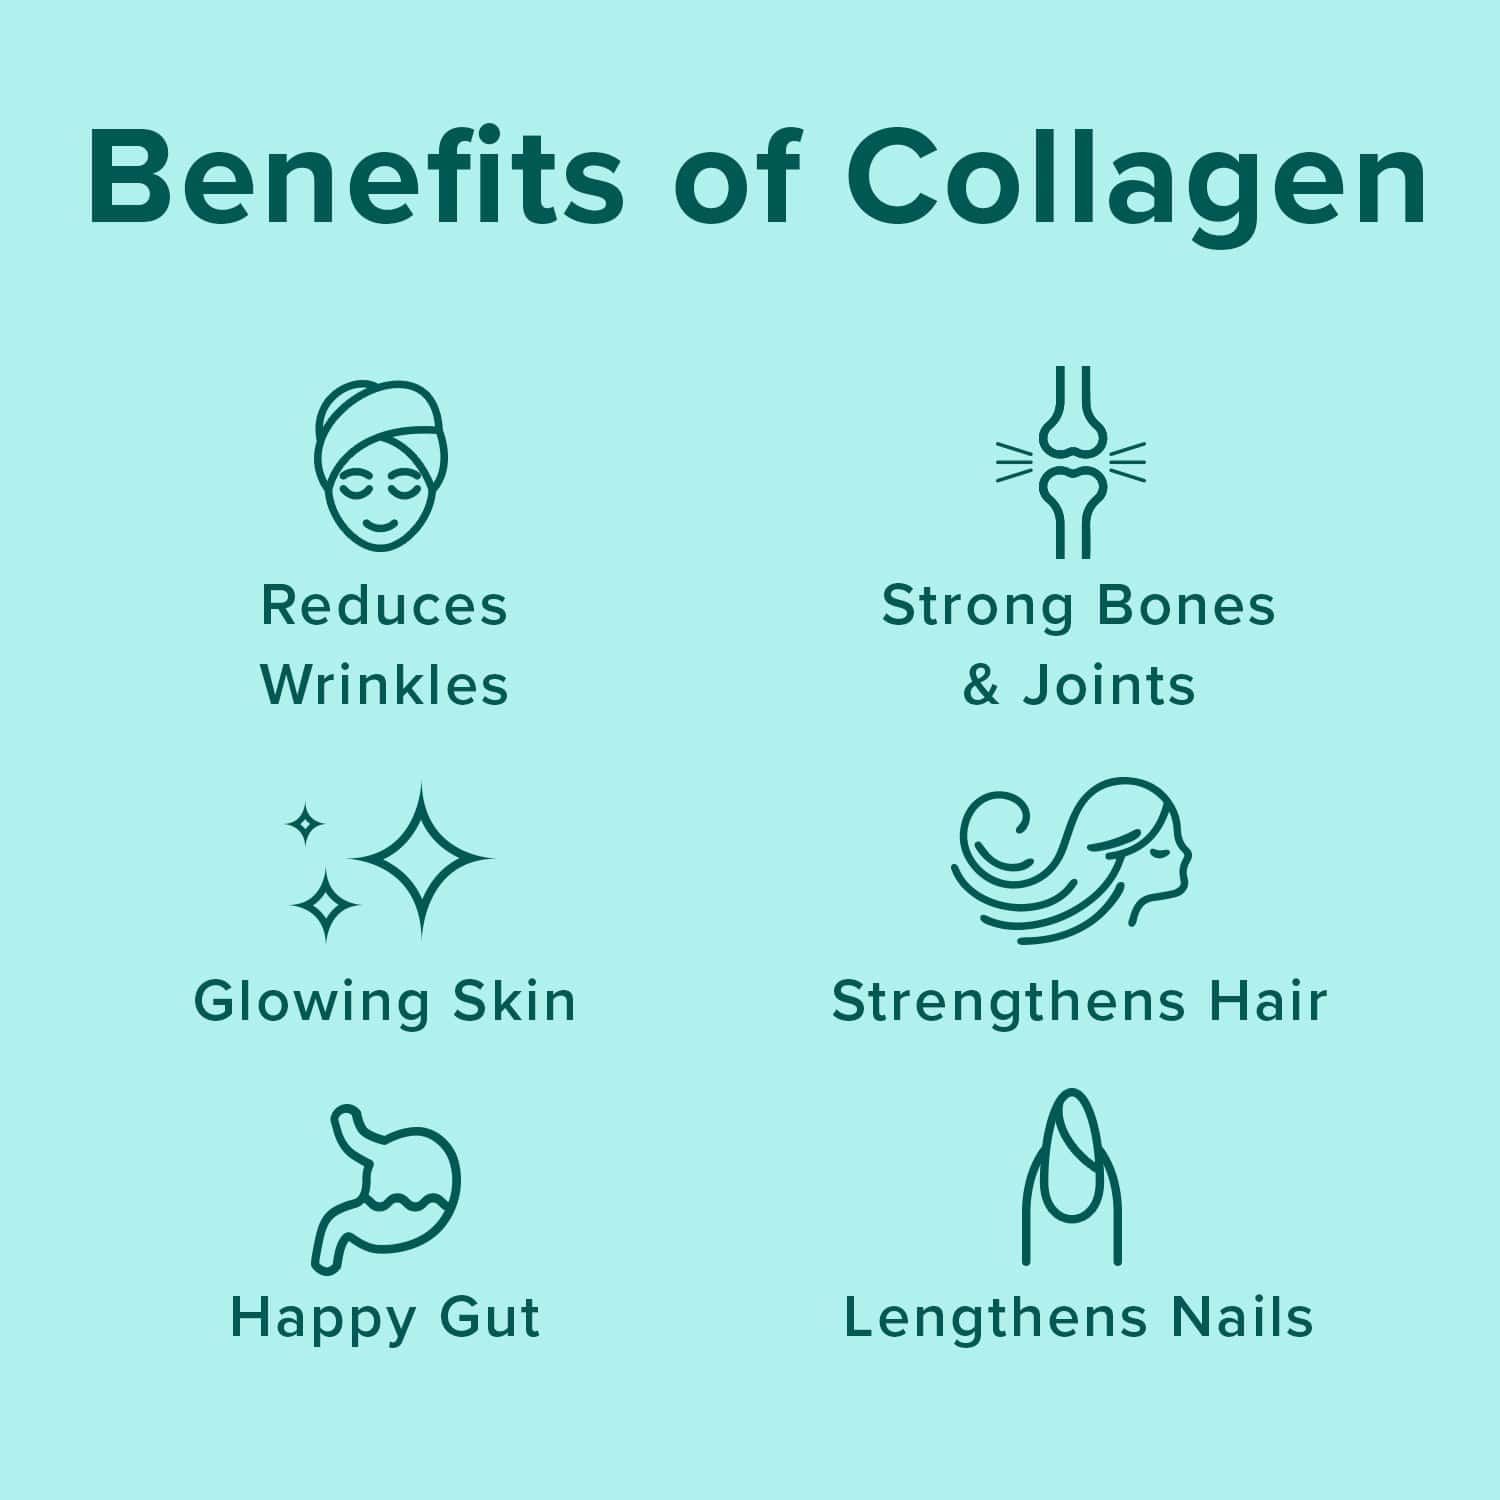 Benefits of Collagen - Reduces Wrinkles, Strong Bones & Joints, Glowing Skin, Strengthens Hair, Happy Gut, Lengthens Nails